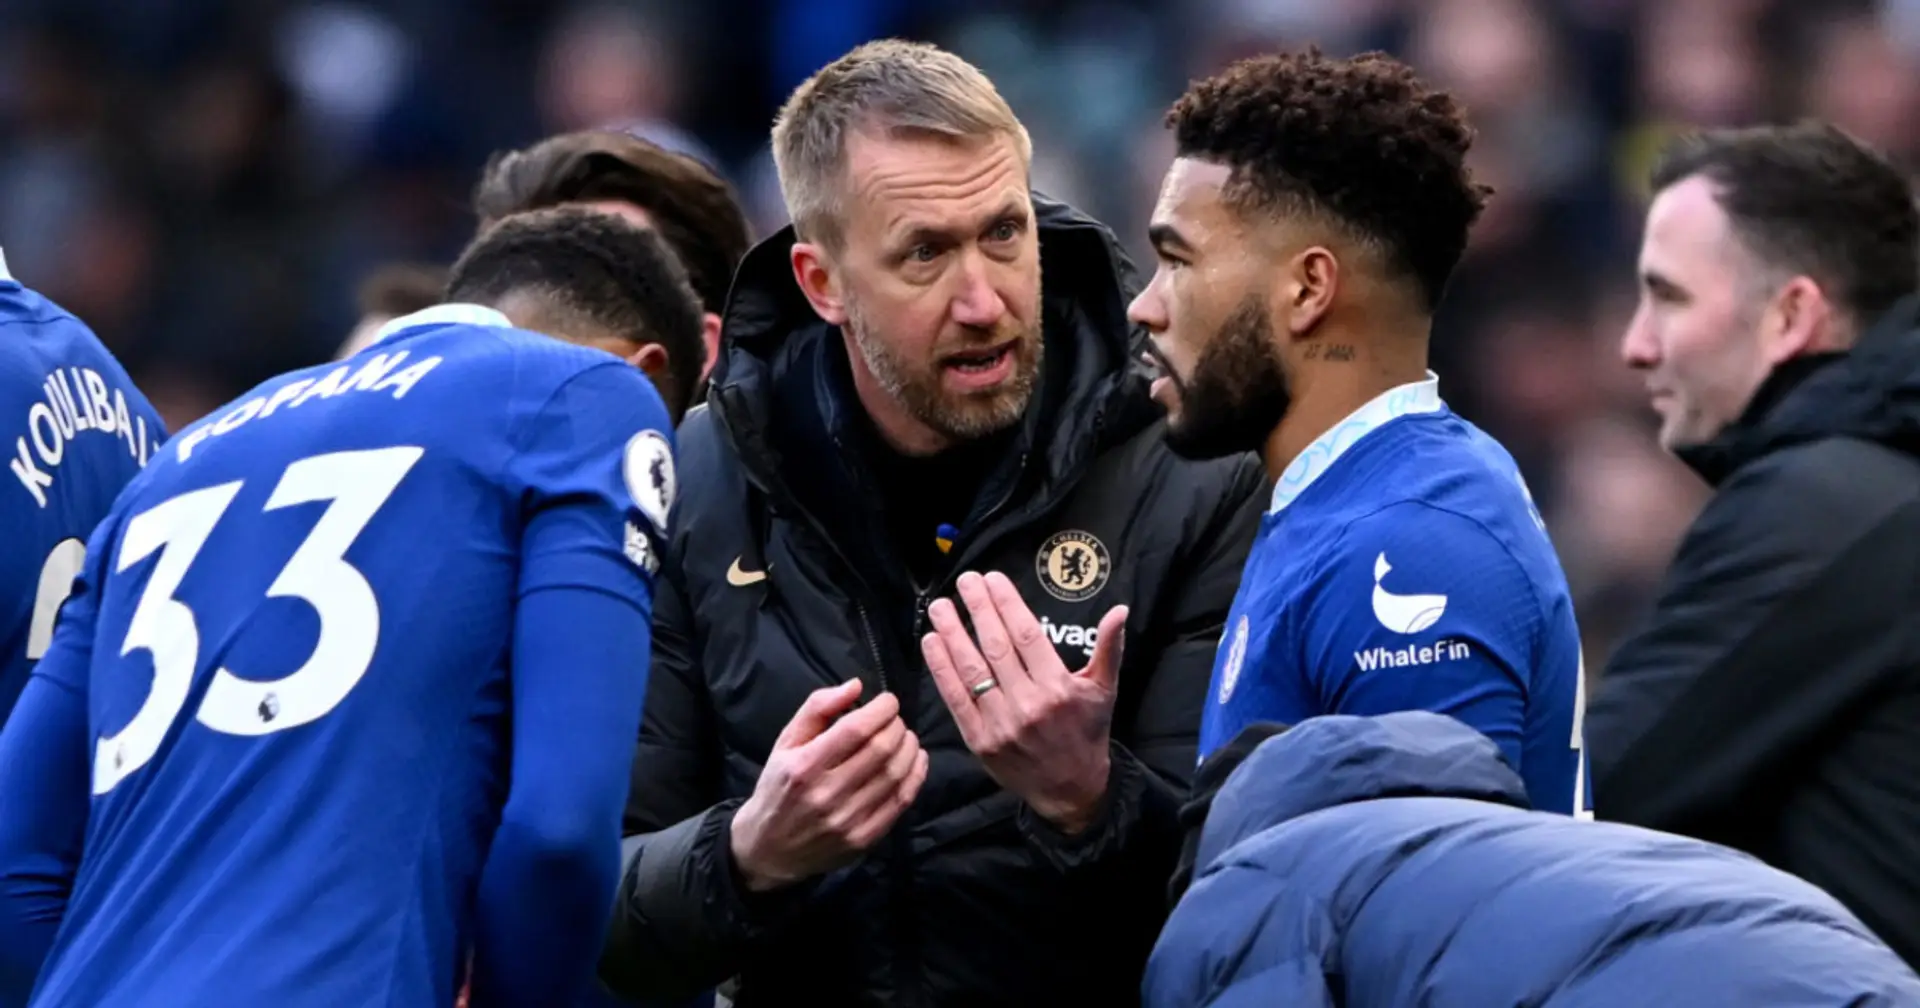 Potter held 'heart-to-heart talks' with Chelsea players ahead of two latest wins - The Telegraph